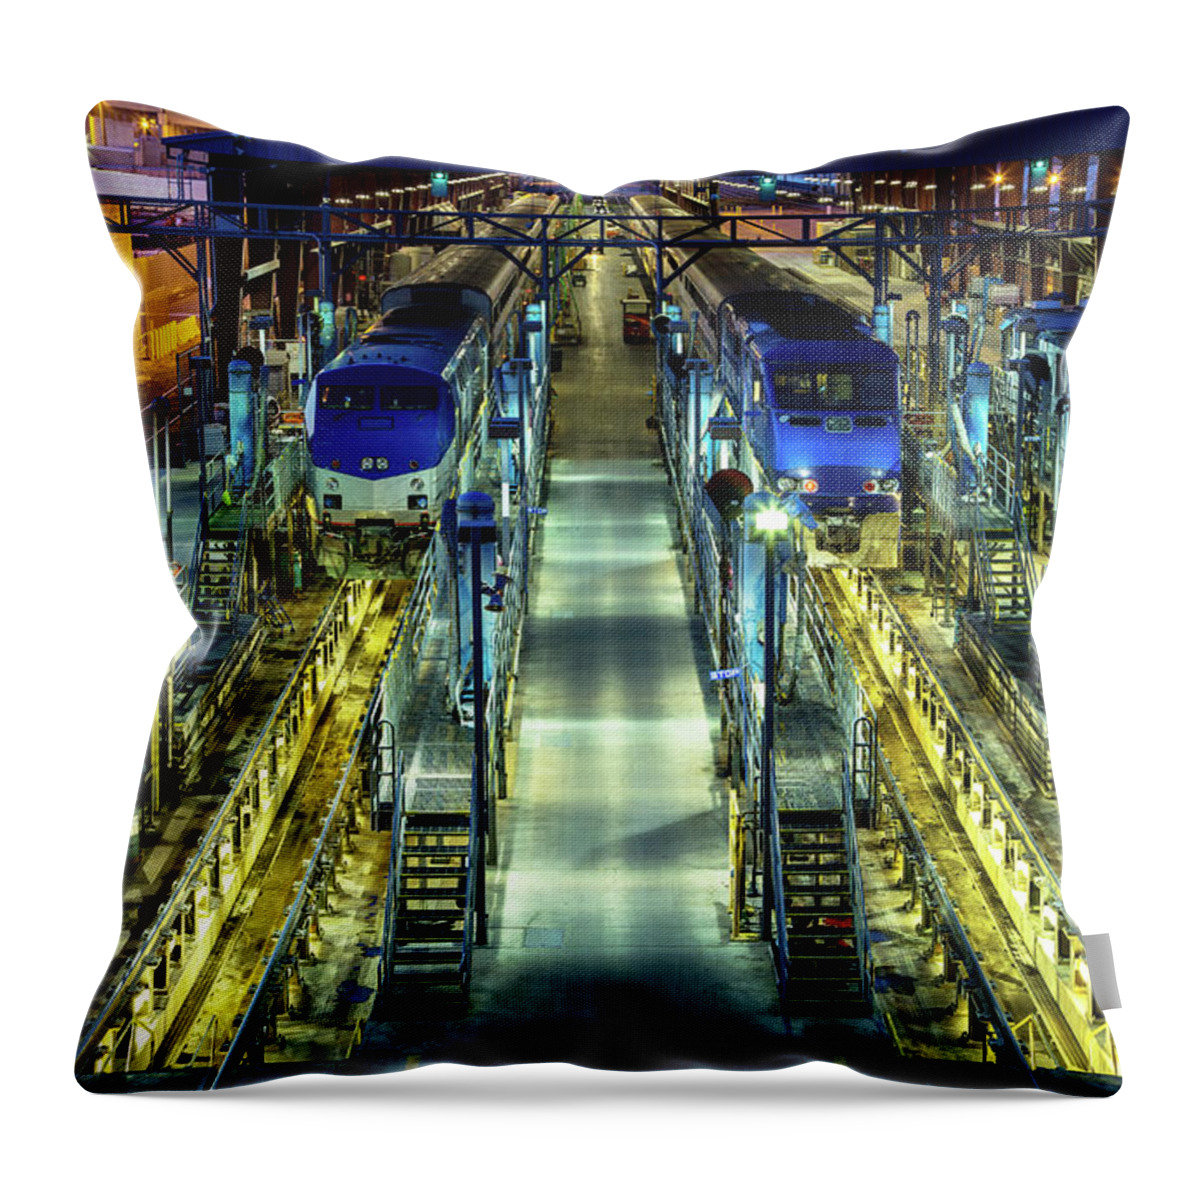 Tranquility Throw Pillow featuring the photograph Passenger Train Maintenance Yard At by Hal Bergman